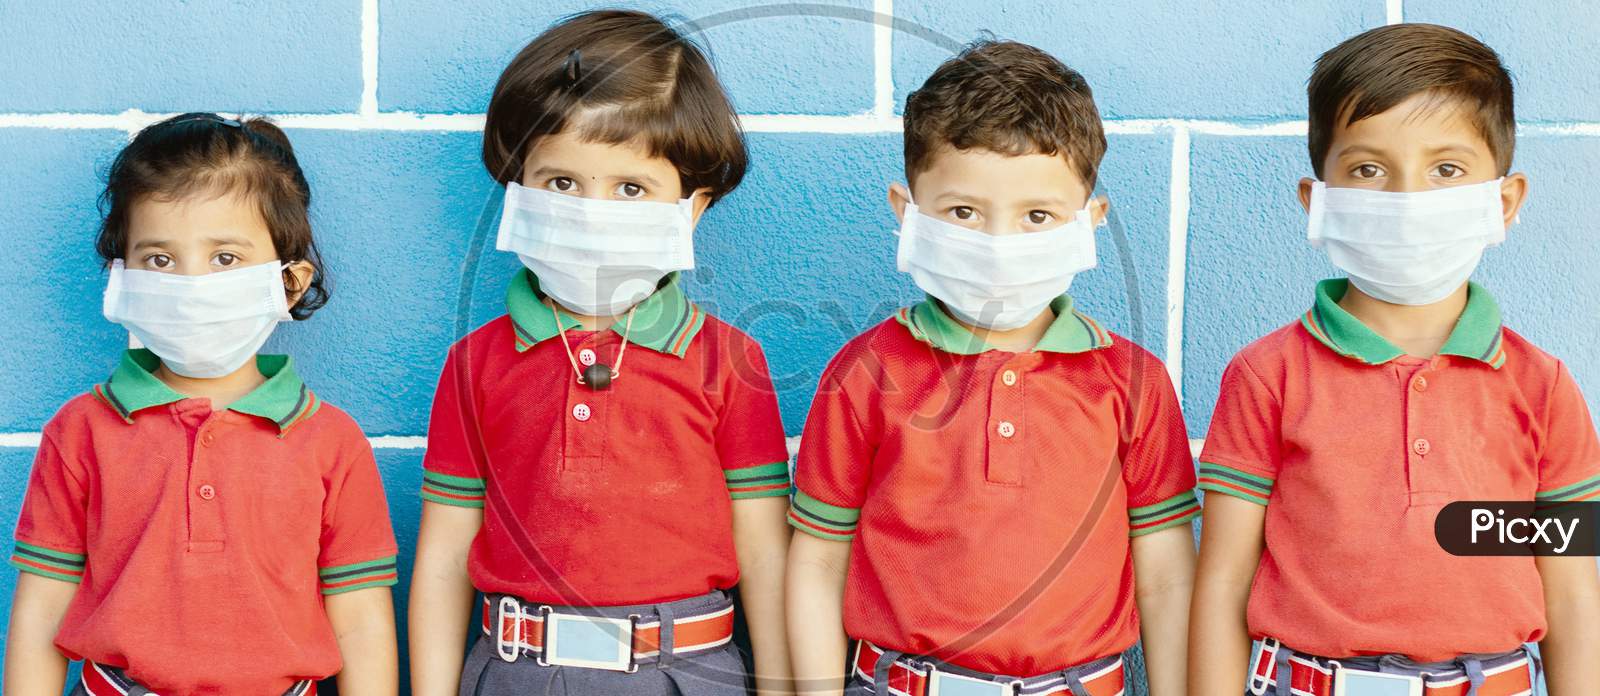 School Preteen Kids With Protection Face Mask Against New Coronavirus, Covid -19, Ncov 2019 Or Sars Cov 2 Virus At School - Children Wore Medical Mask Due To Coronavirus Outbreak.